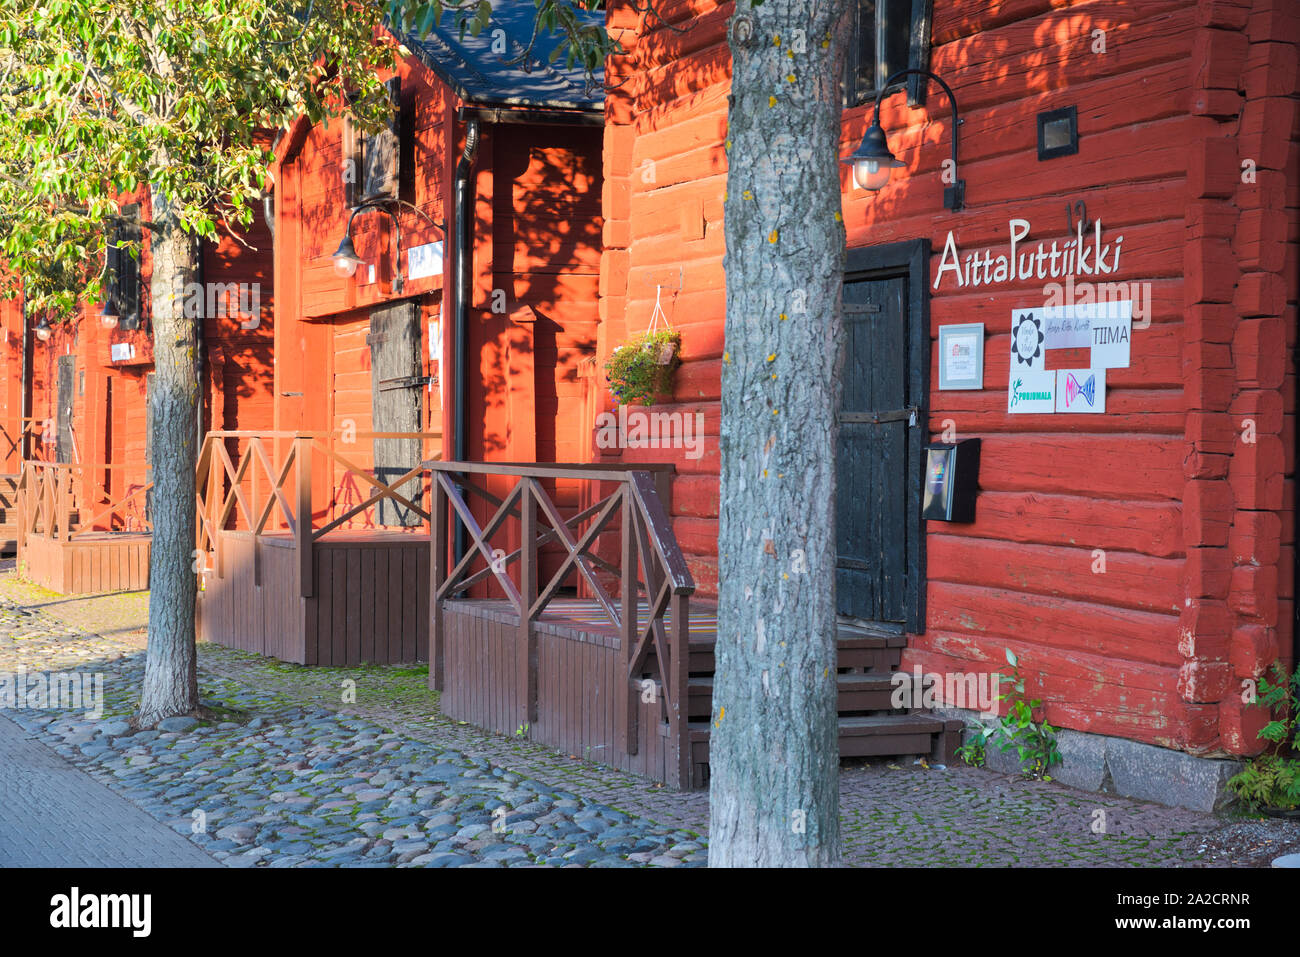 Red buildings (punaiset aitat) in Market Square, Oulu, Finland Stock Photo